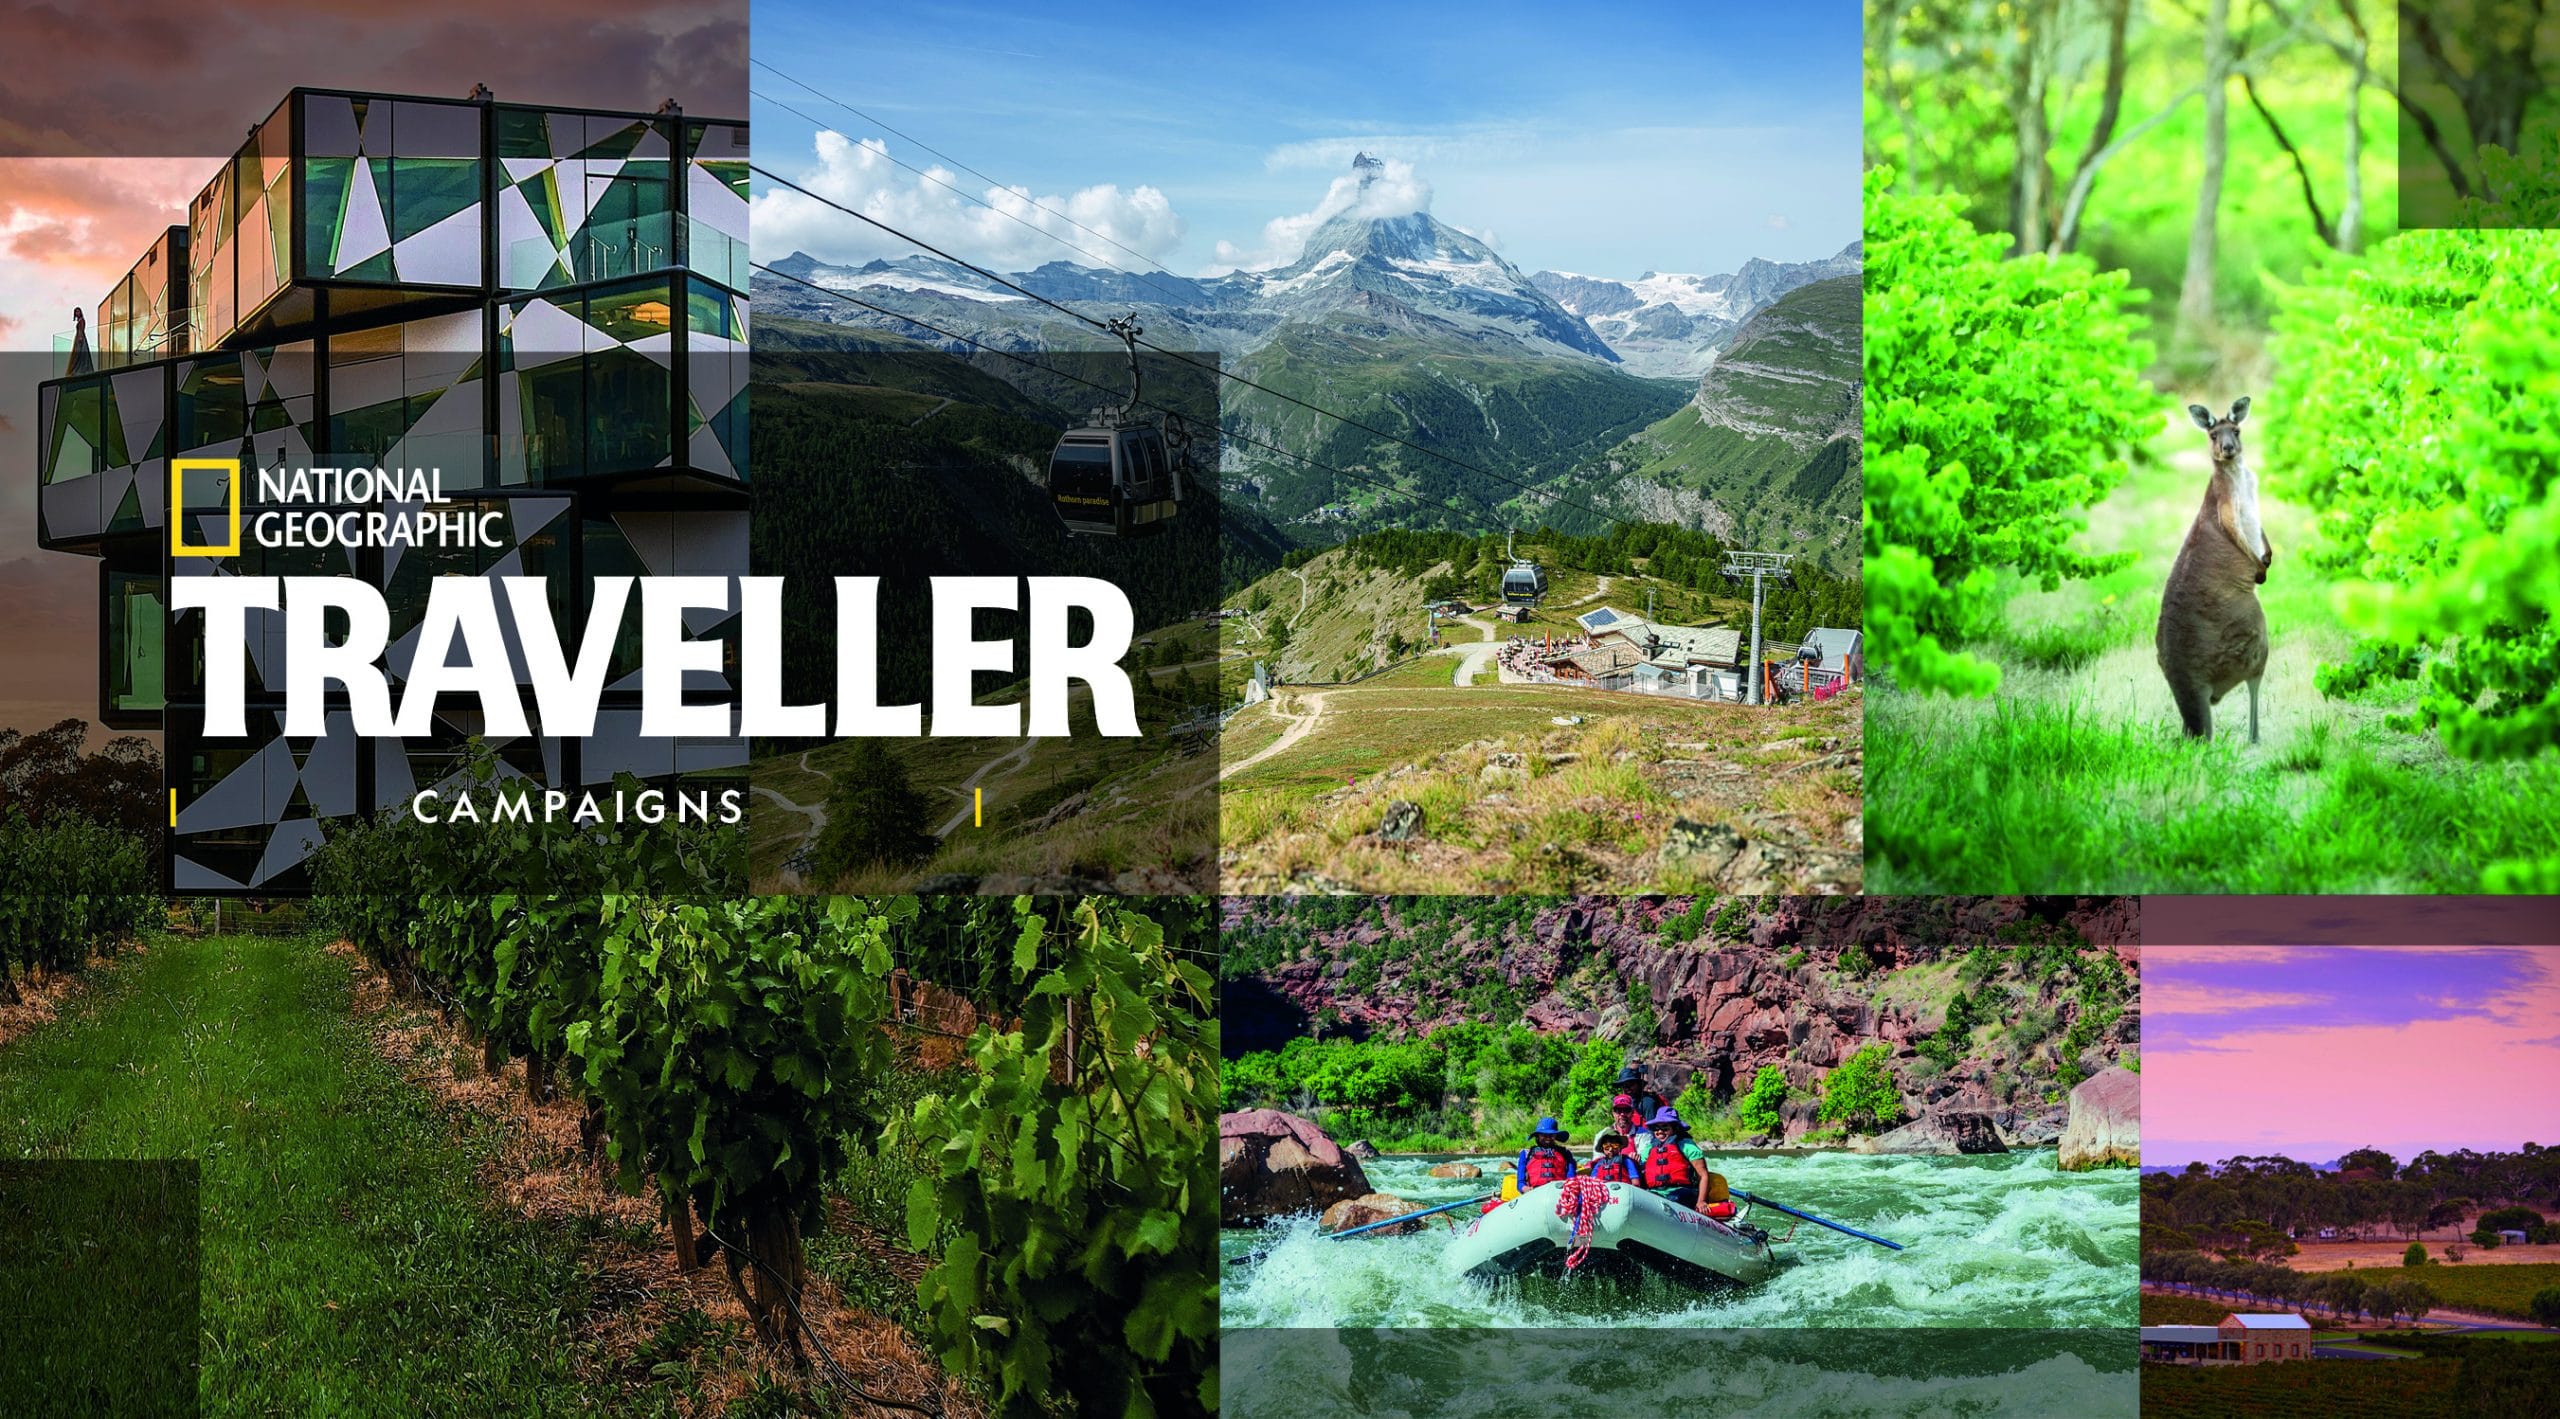 National Geographic Traveller (UK) campaigns.